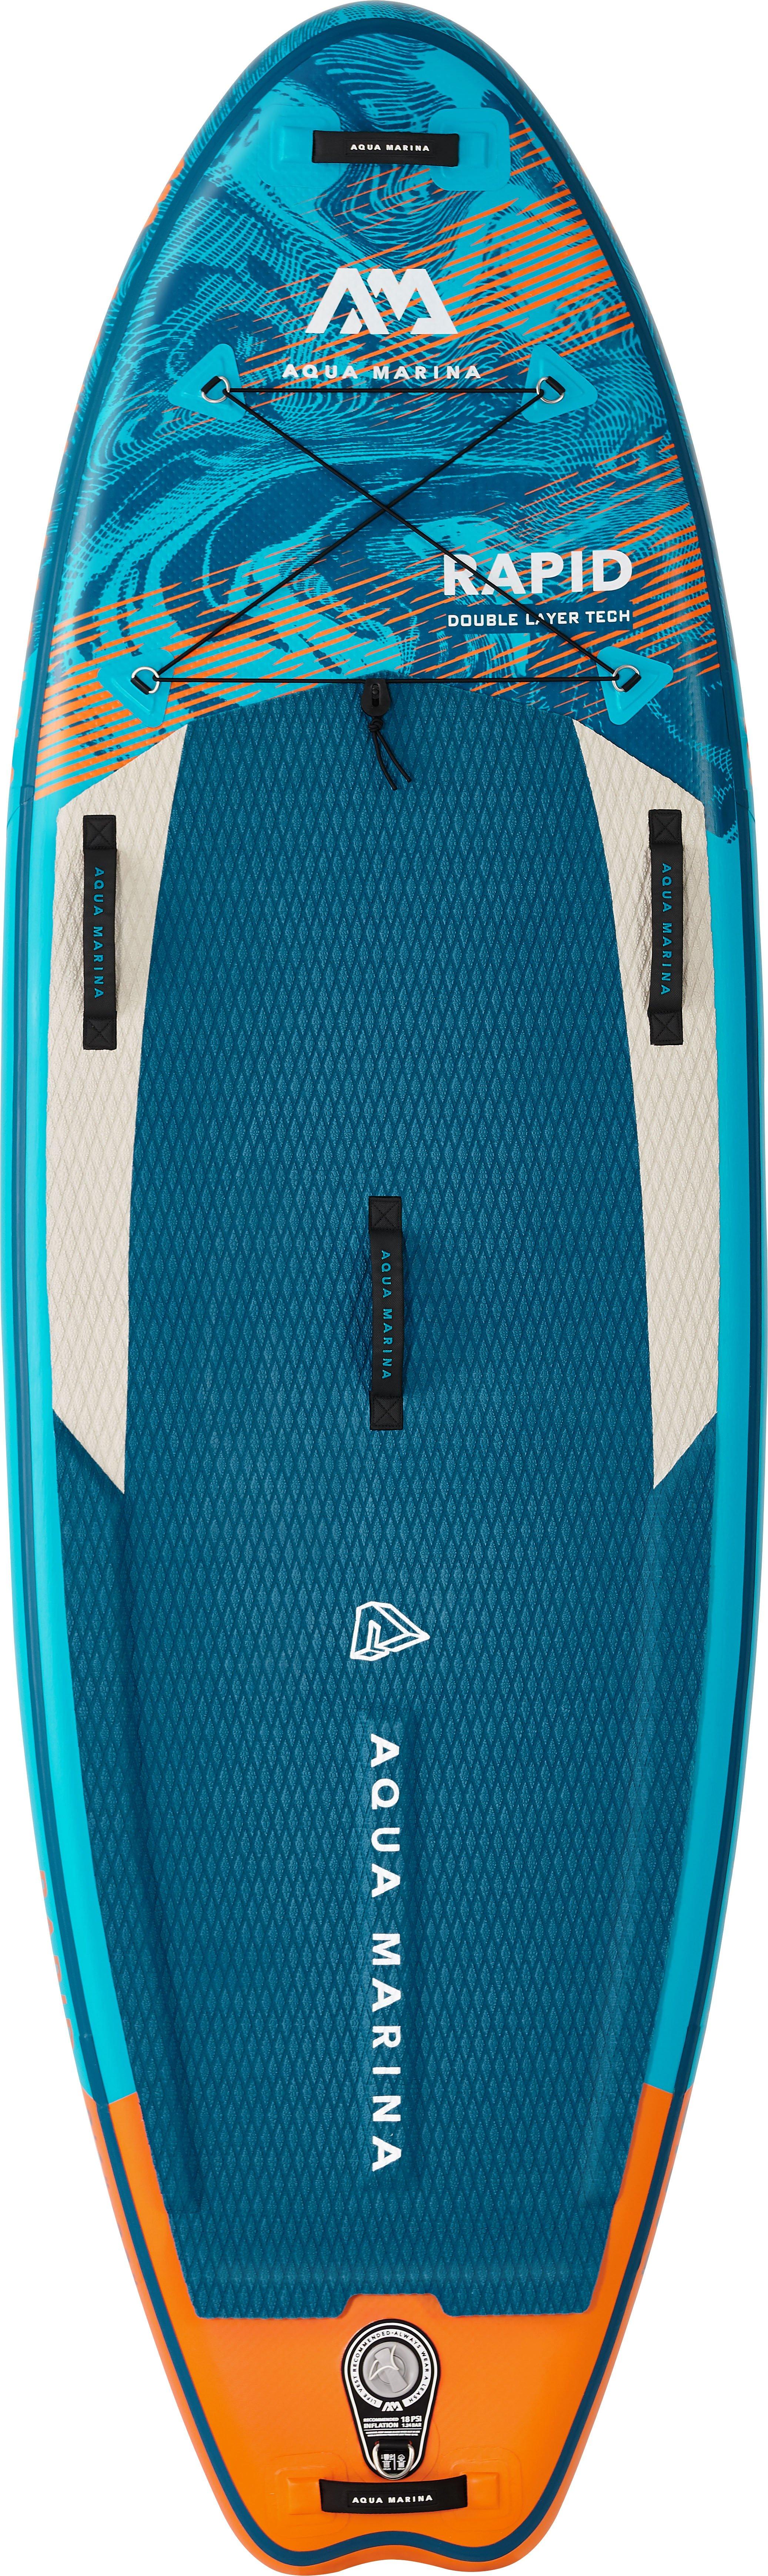 Rapid White Water iSUP Paddle Board - DTI Direct Canada